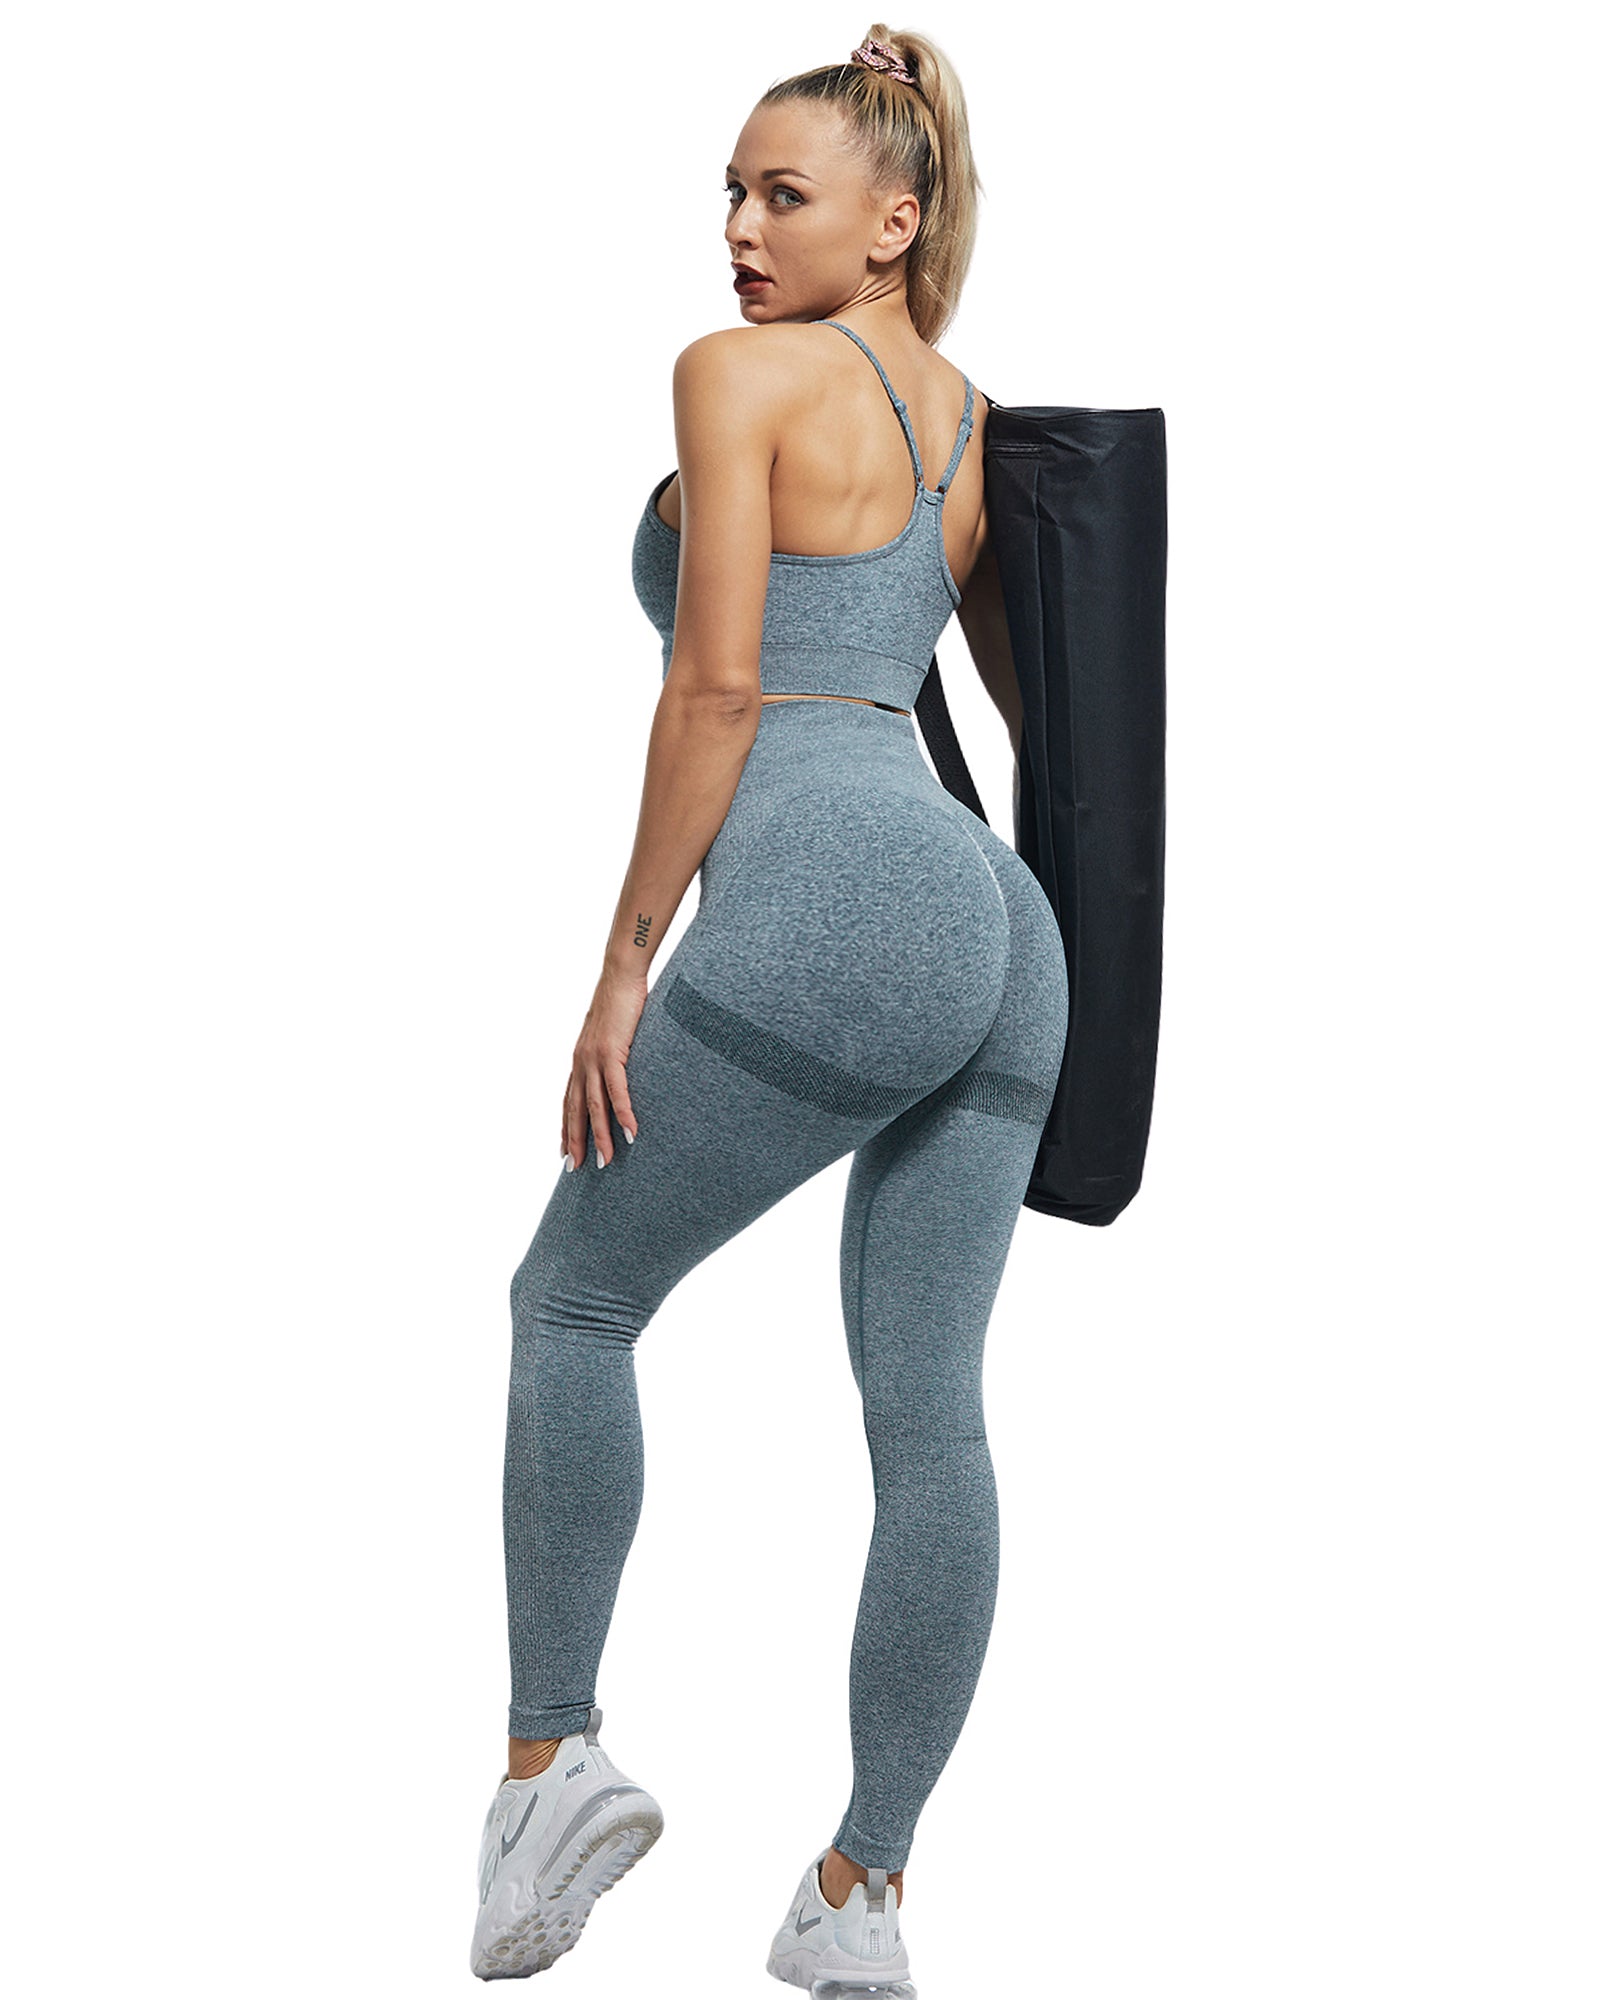 girl wearing gray yoga pants and top holding a bag with a white background